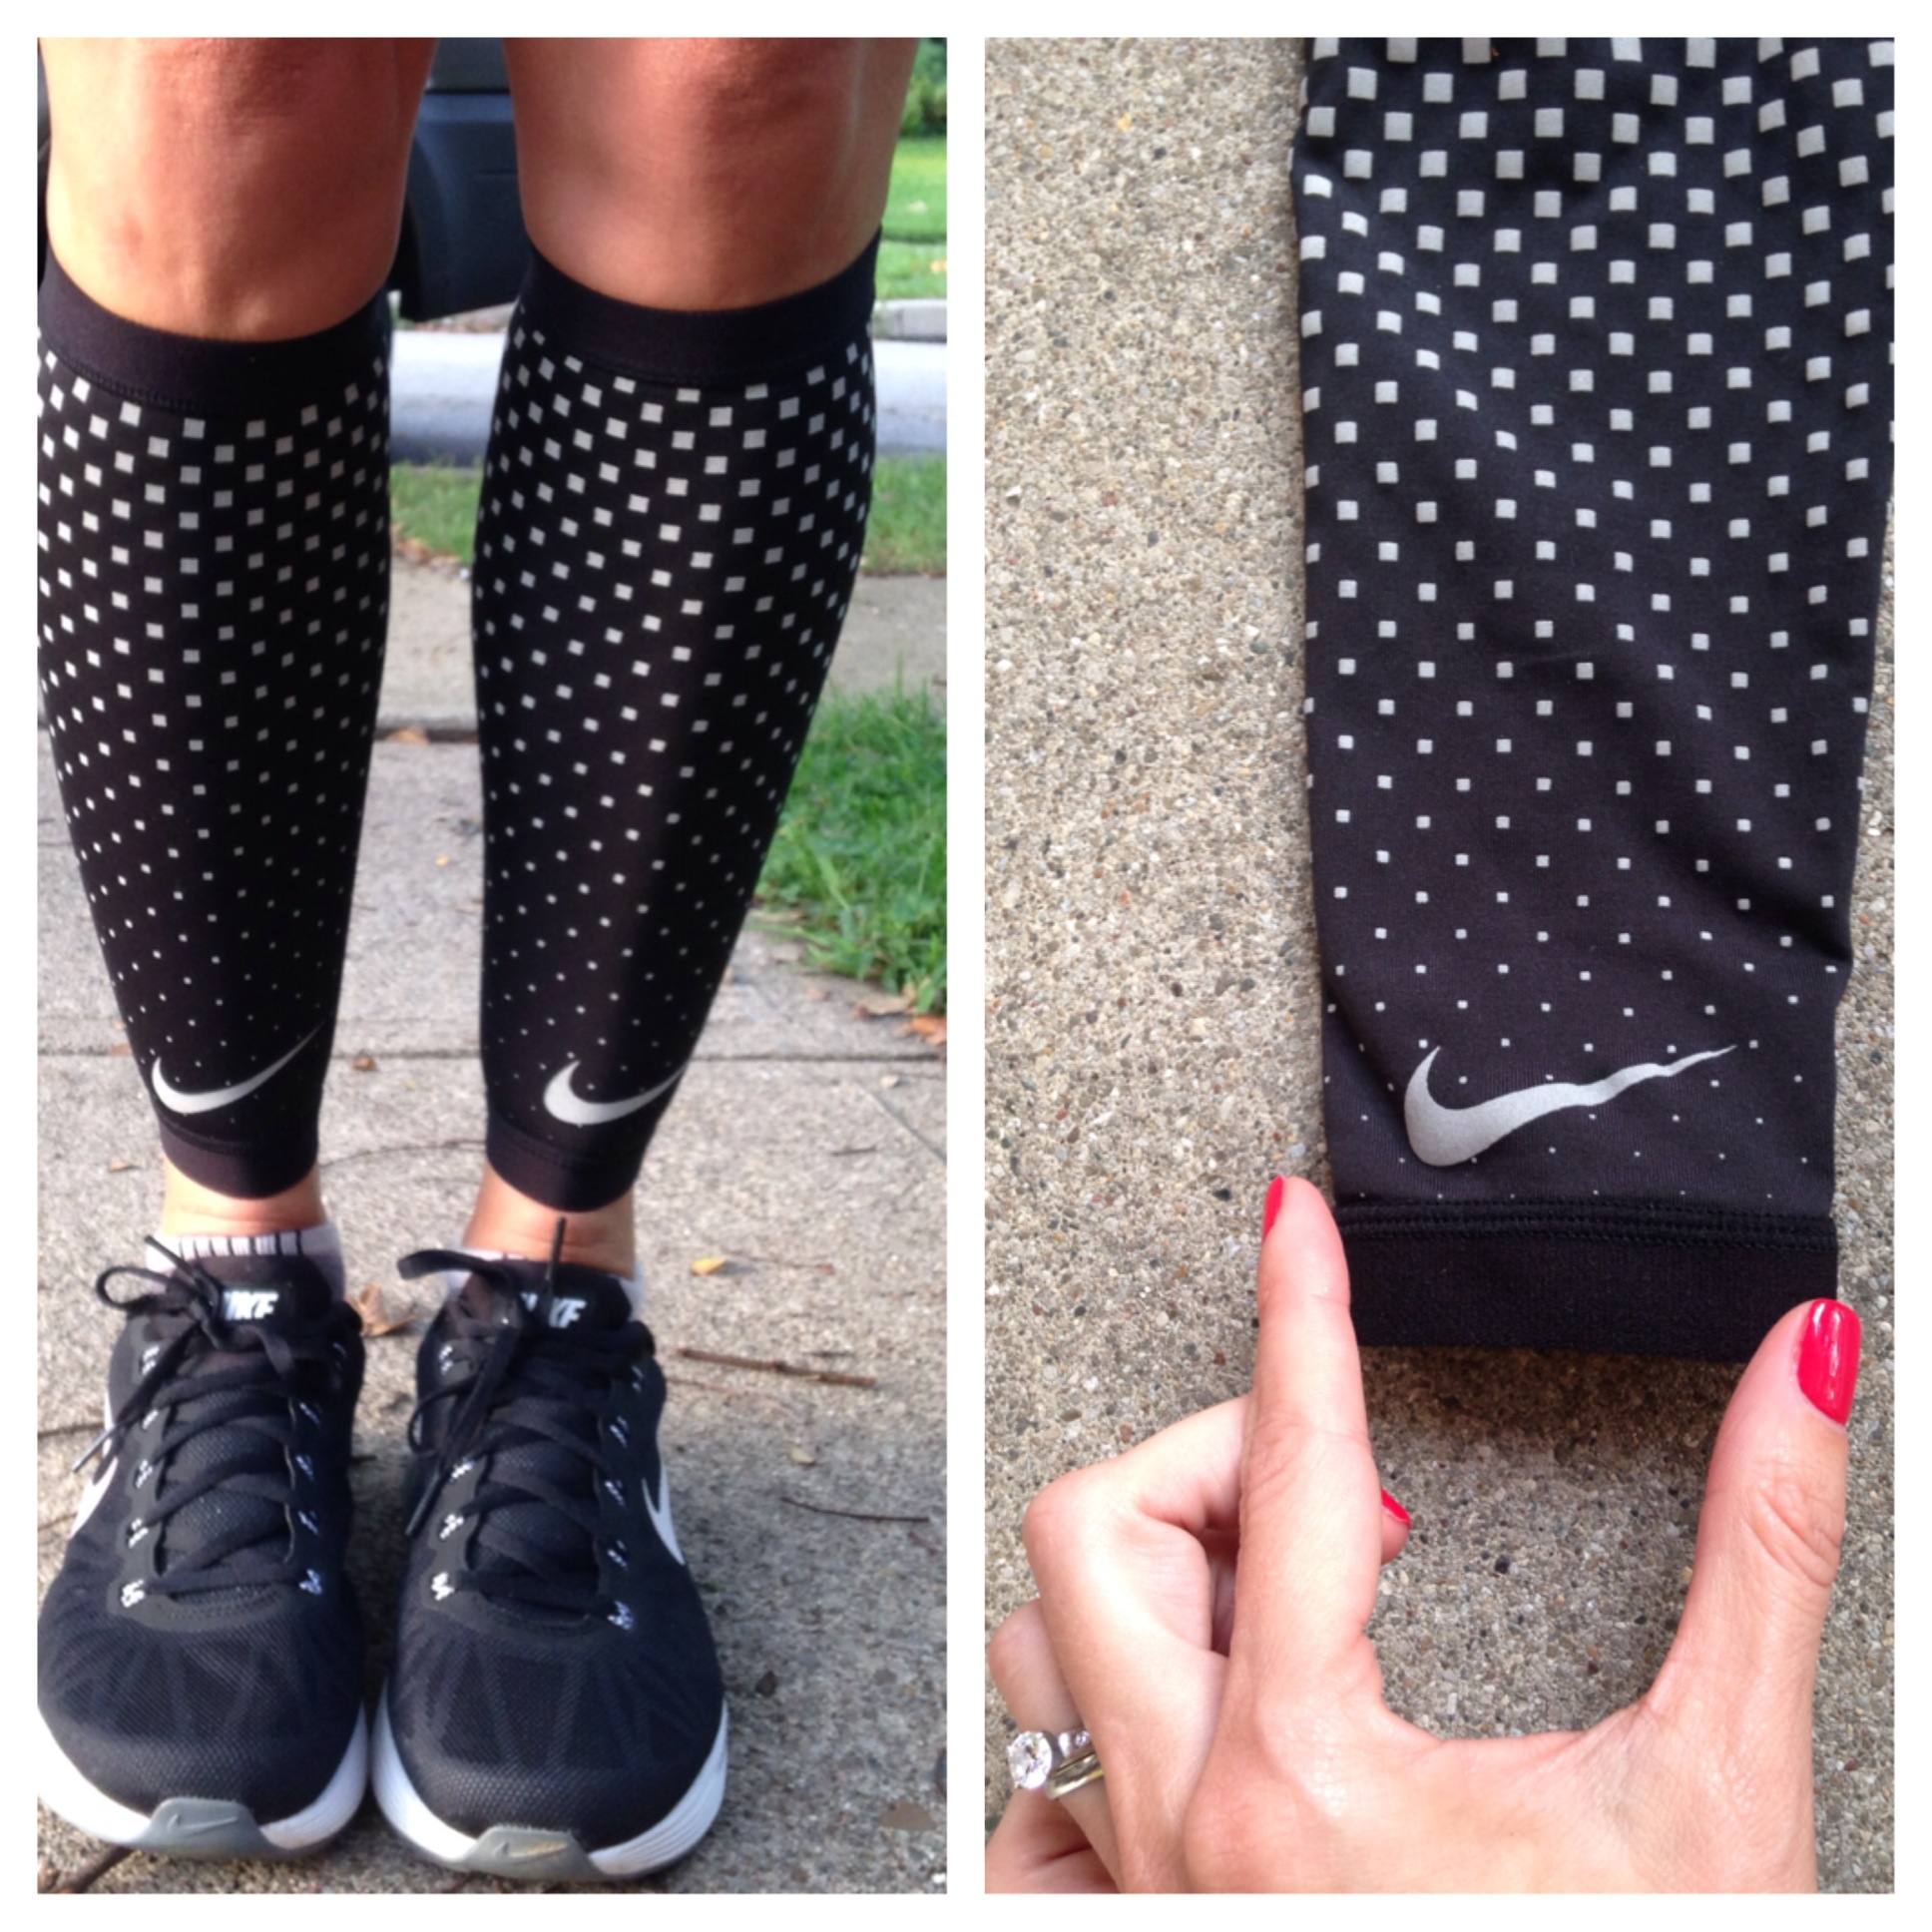 Nike Pro Calf Sleeve – Bad Angel Rules for Running